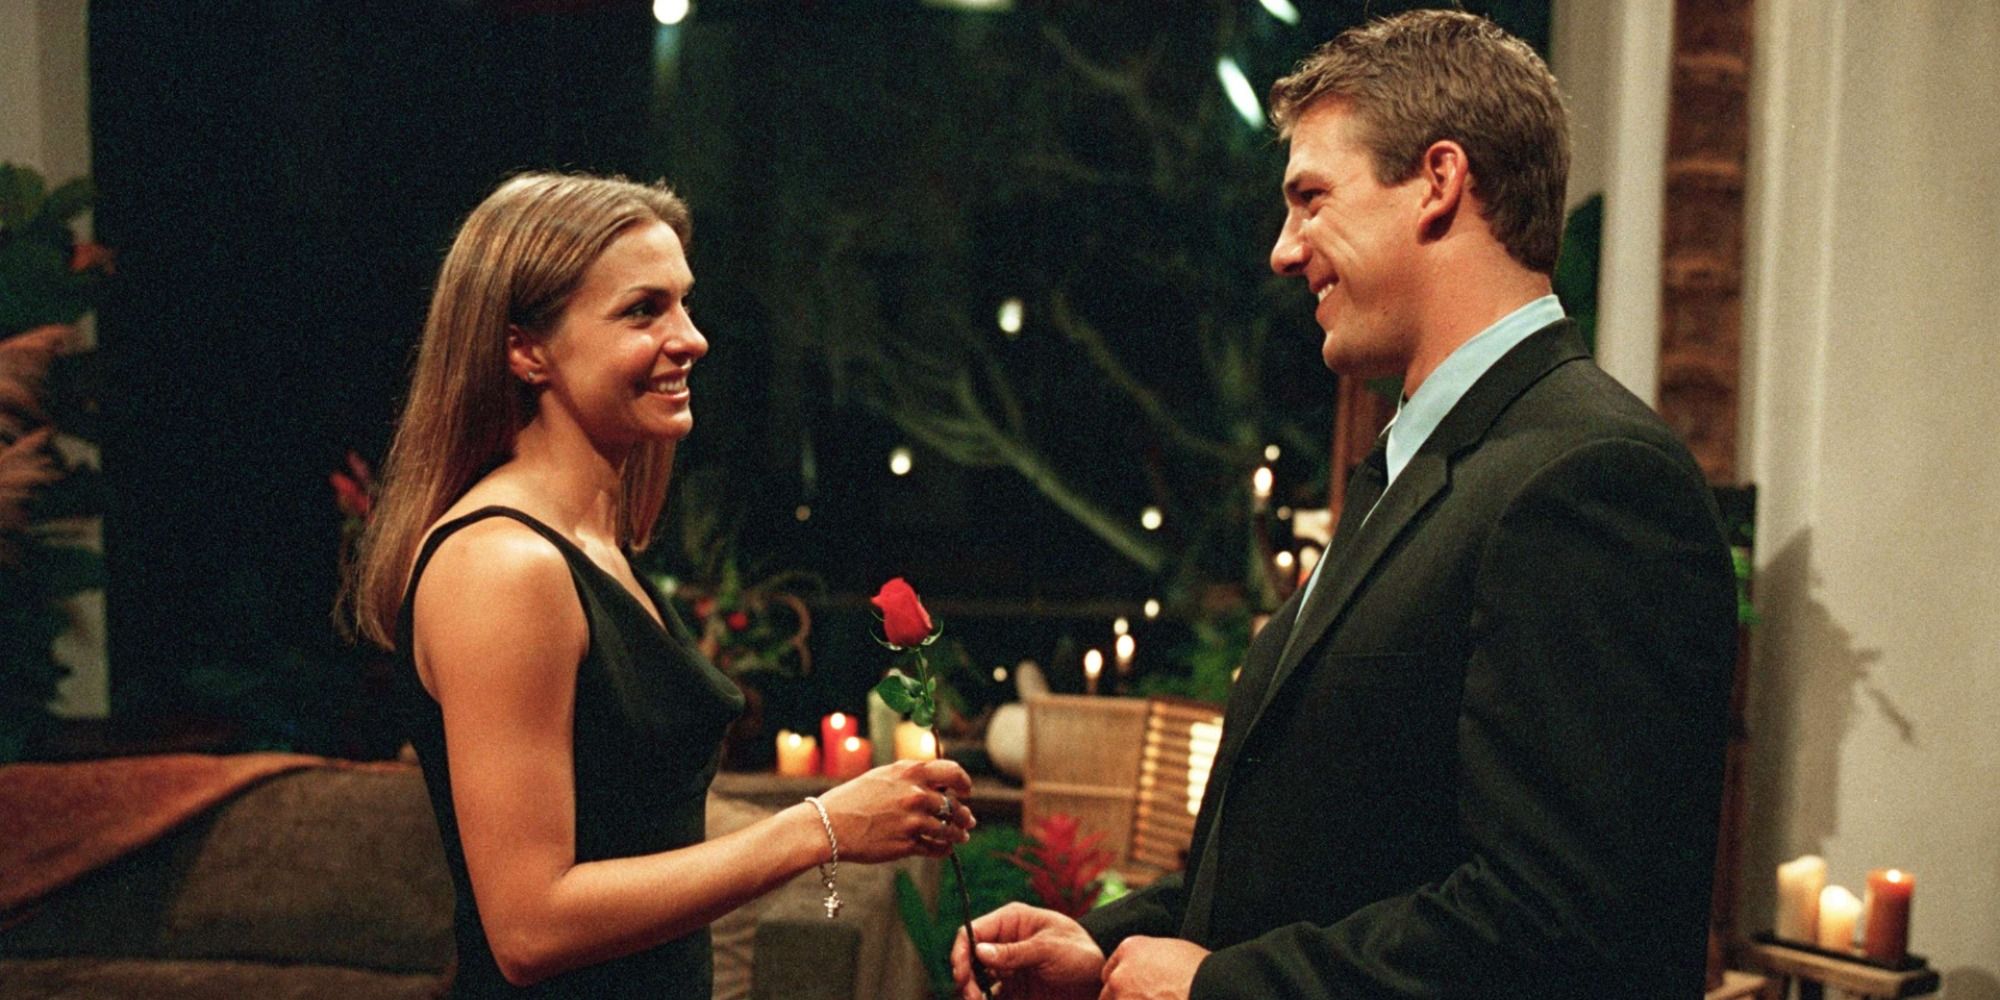 Aaron Buerge handing a rose to Helene in The Bachelor